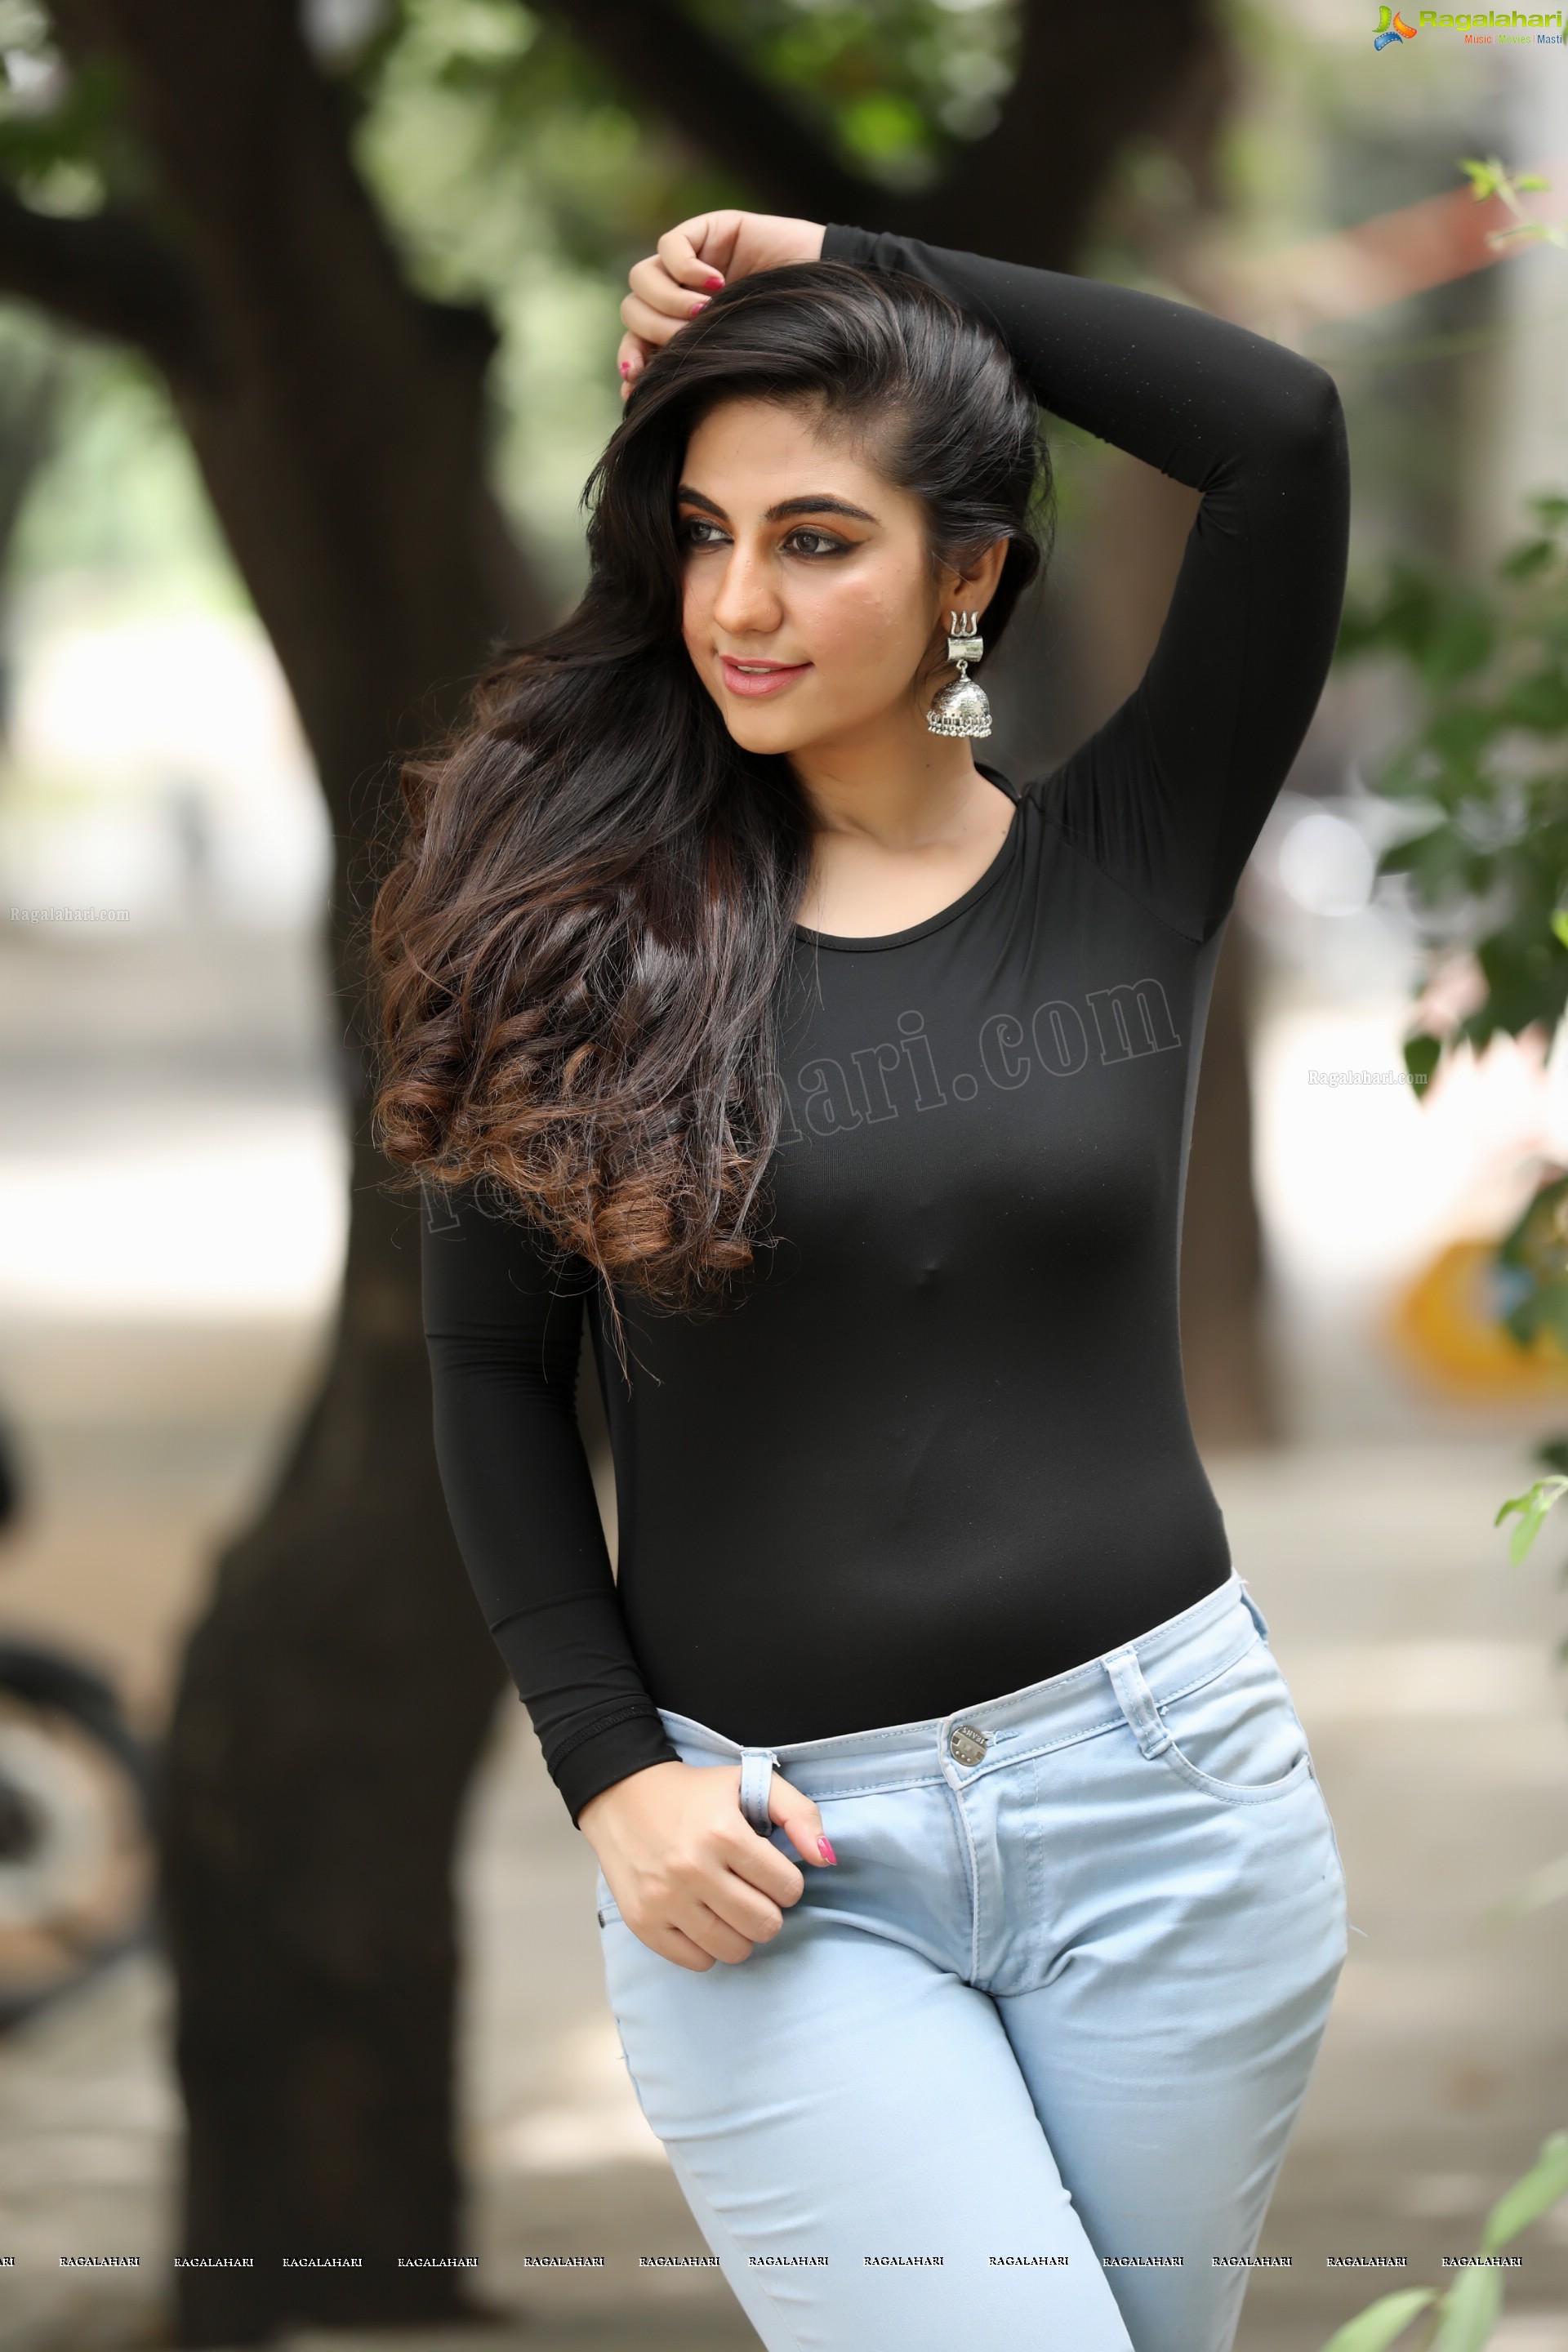 Harshita Panwar in Black Top and Blue Jeans, Exclusive Photo Shoot